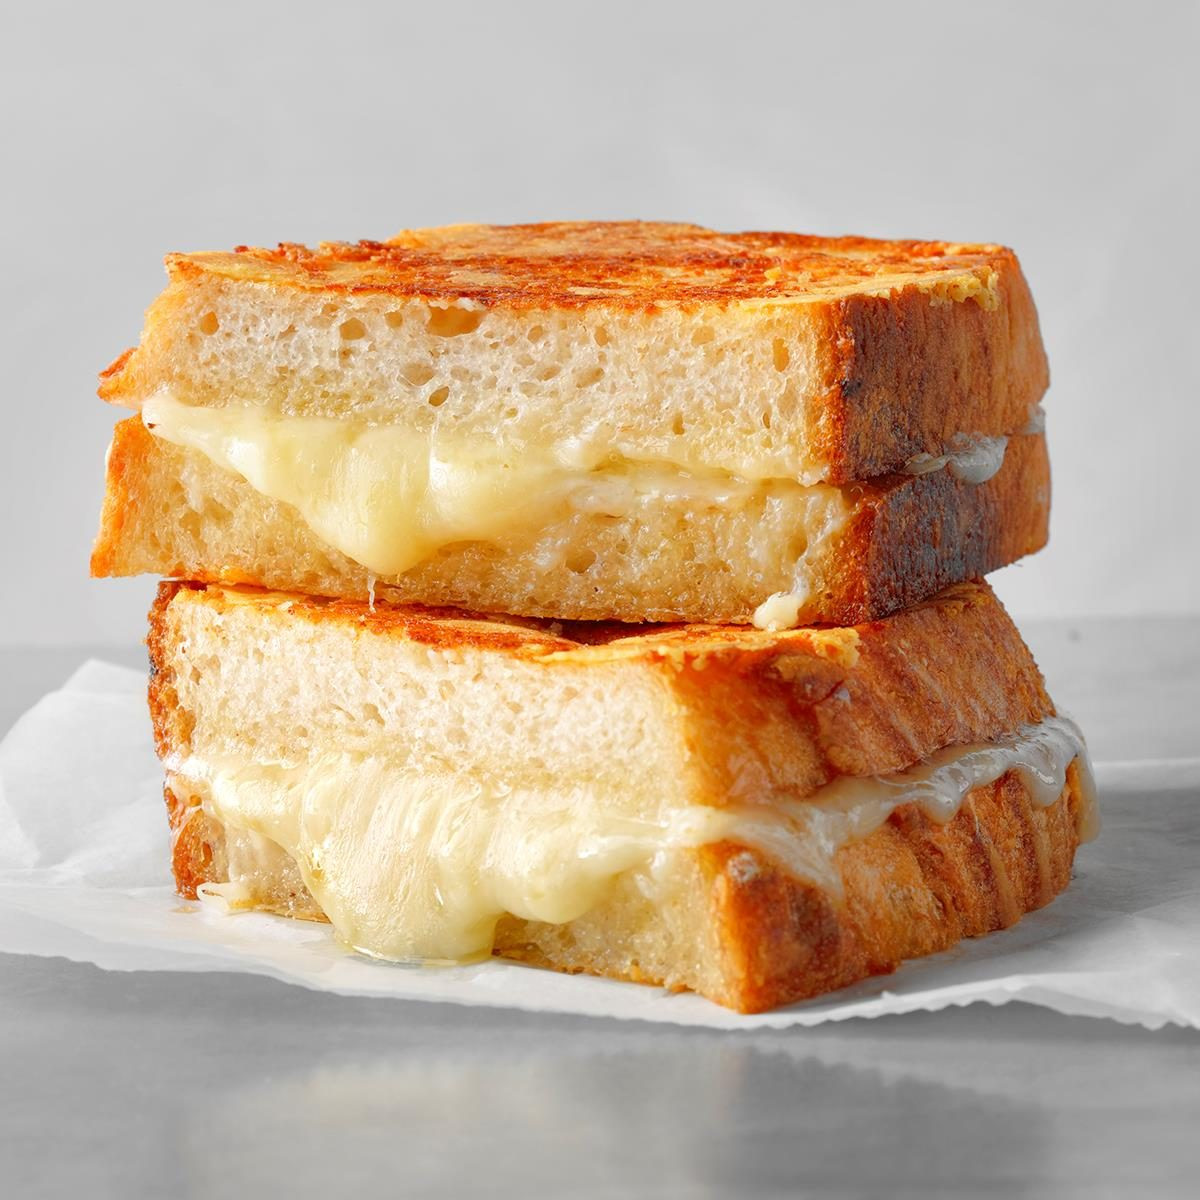 Best Cheese For Grilled Cheese Sandwiches
 The Best Ever Grilled Cheese Sandwich Recipe